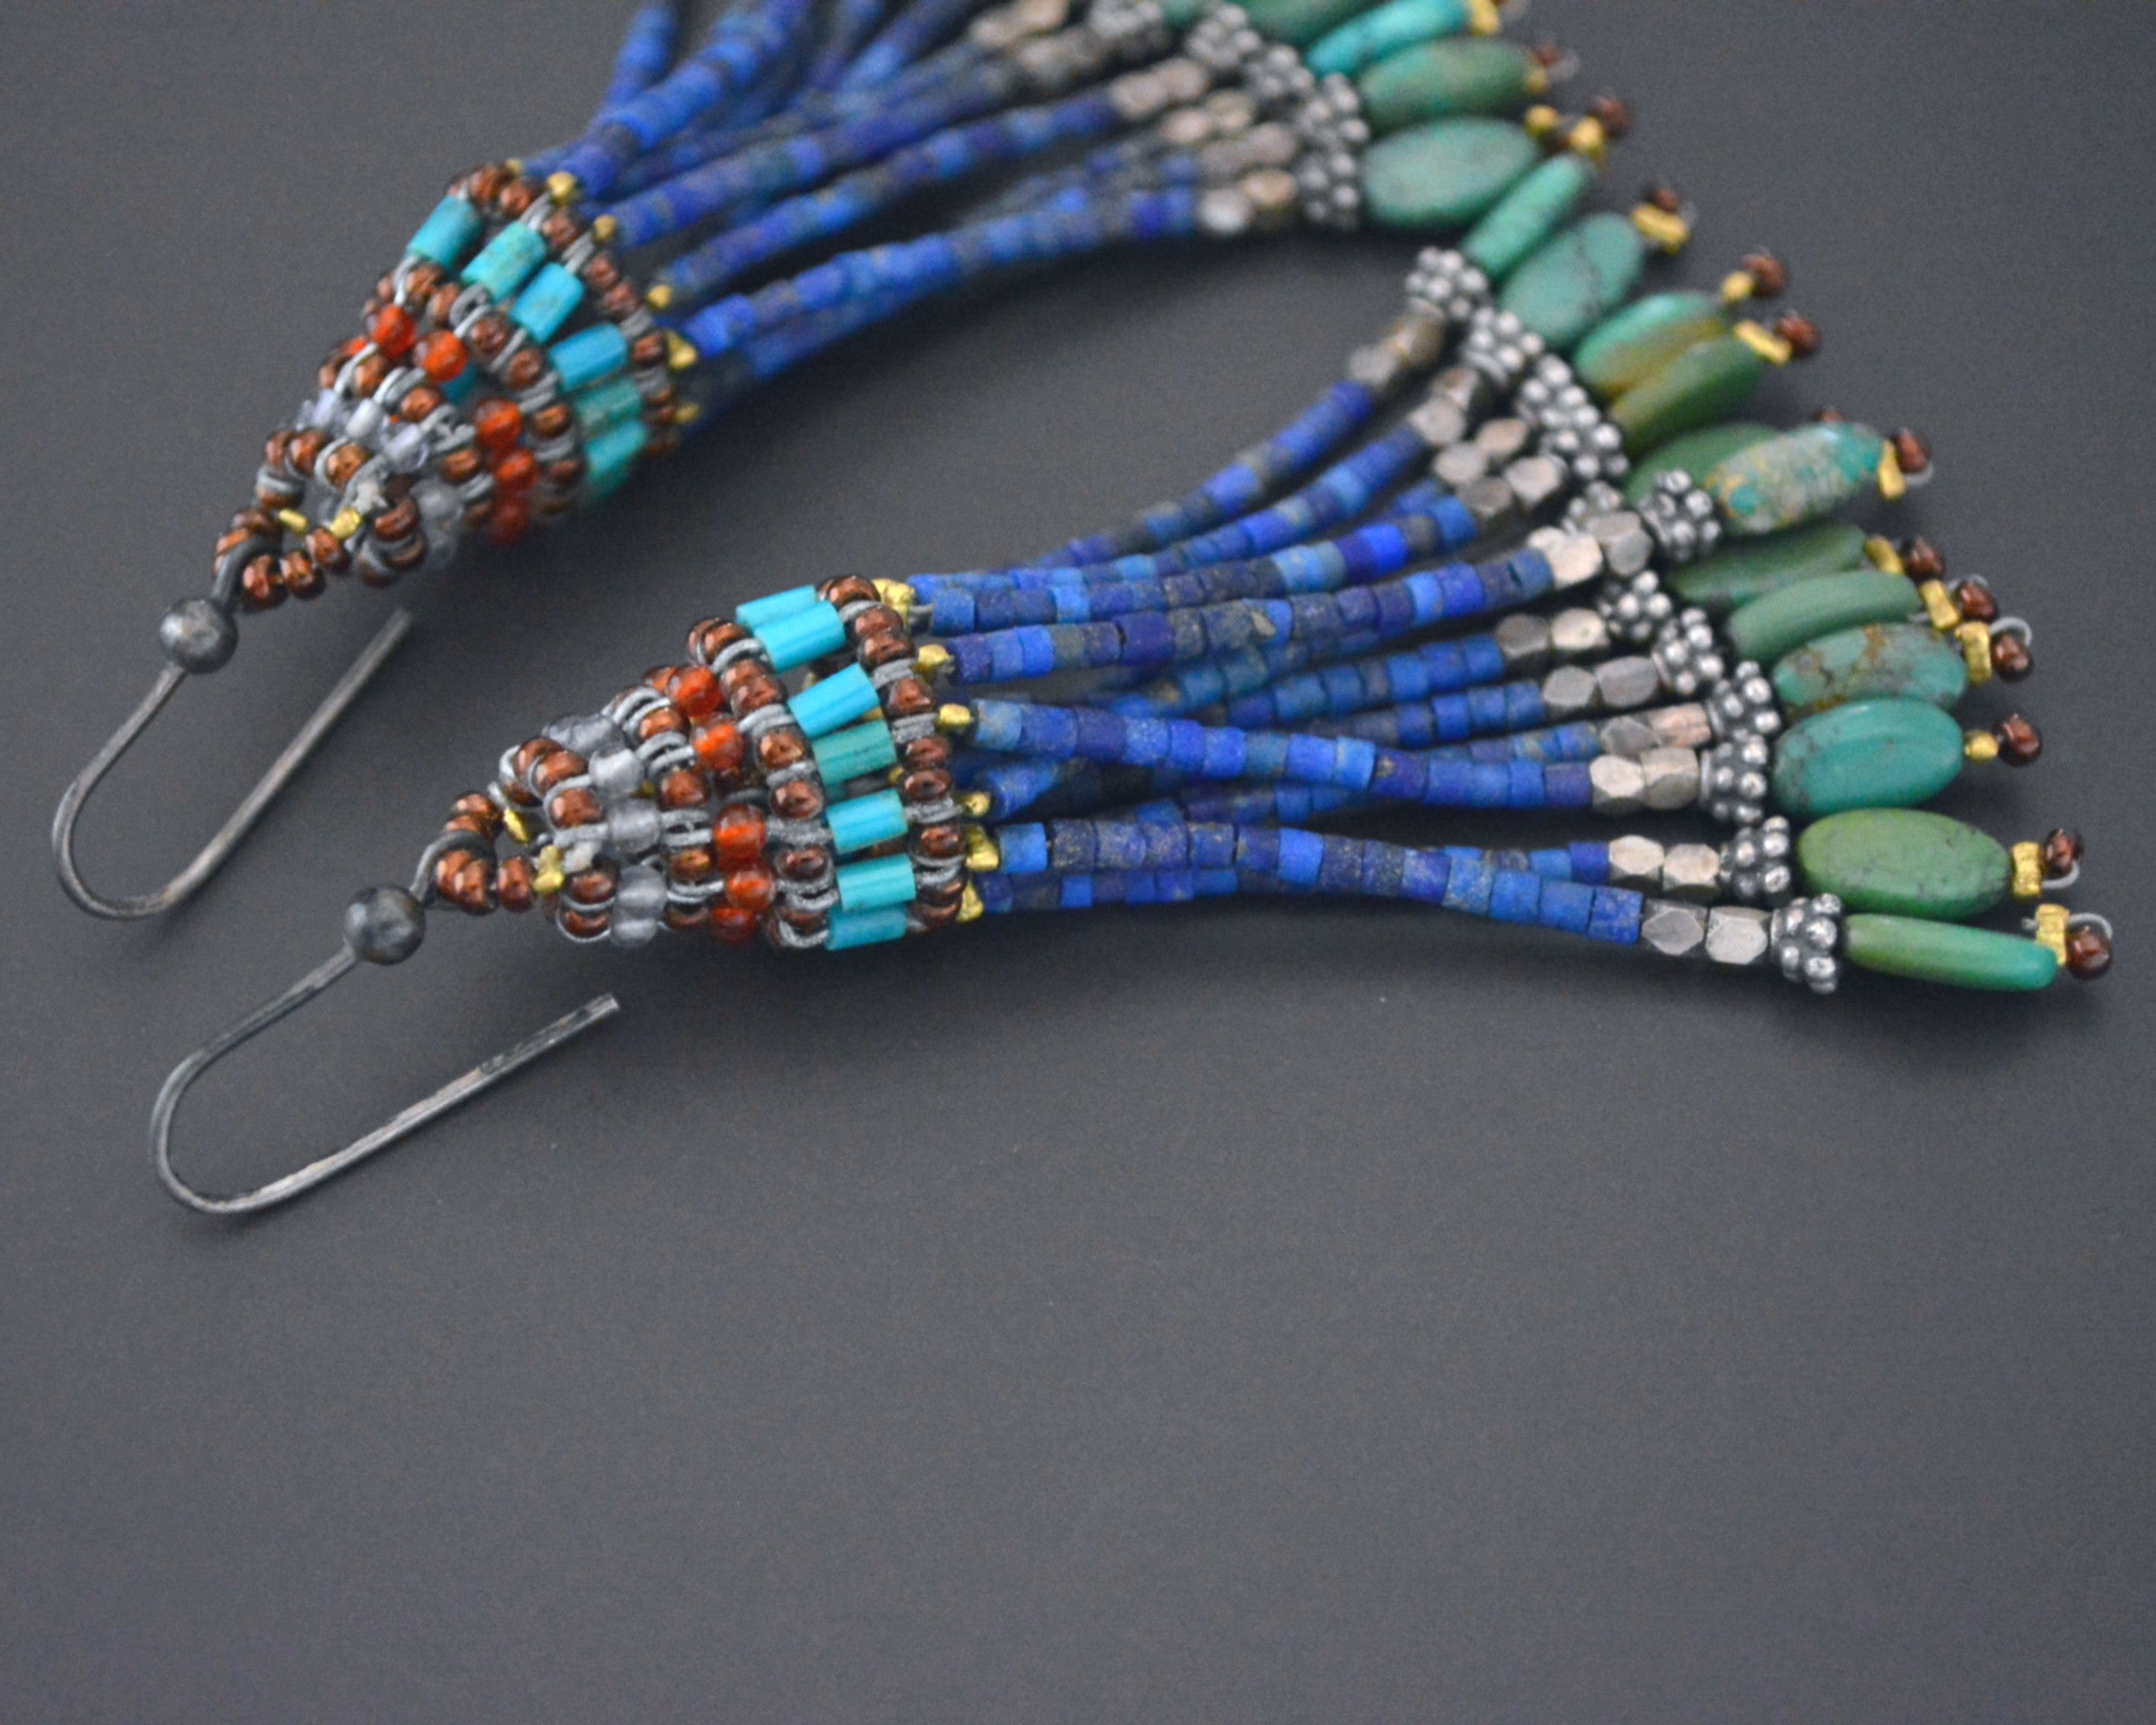 Beaded Tassel Earrings with Turquoise and Lapis Lazuli